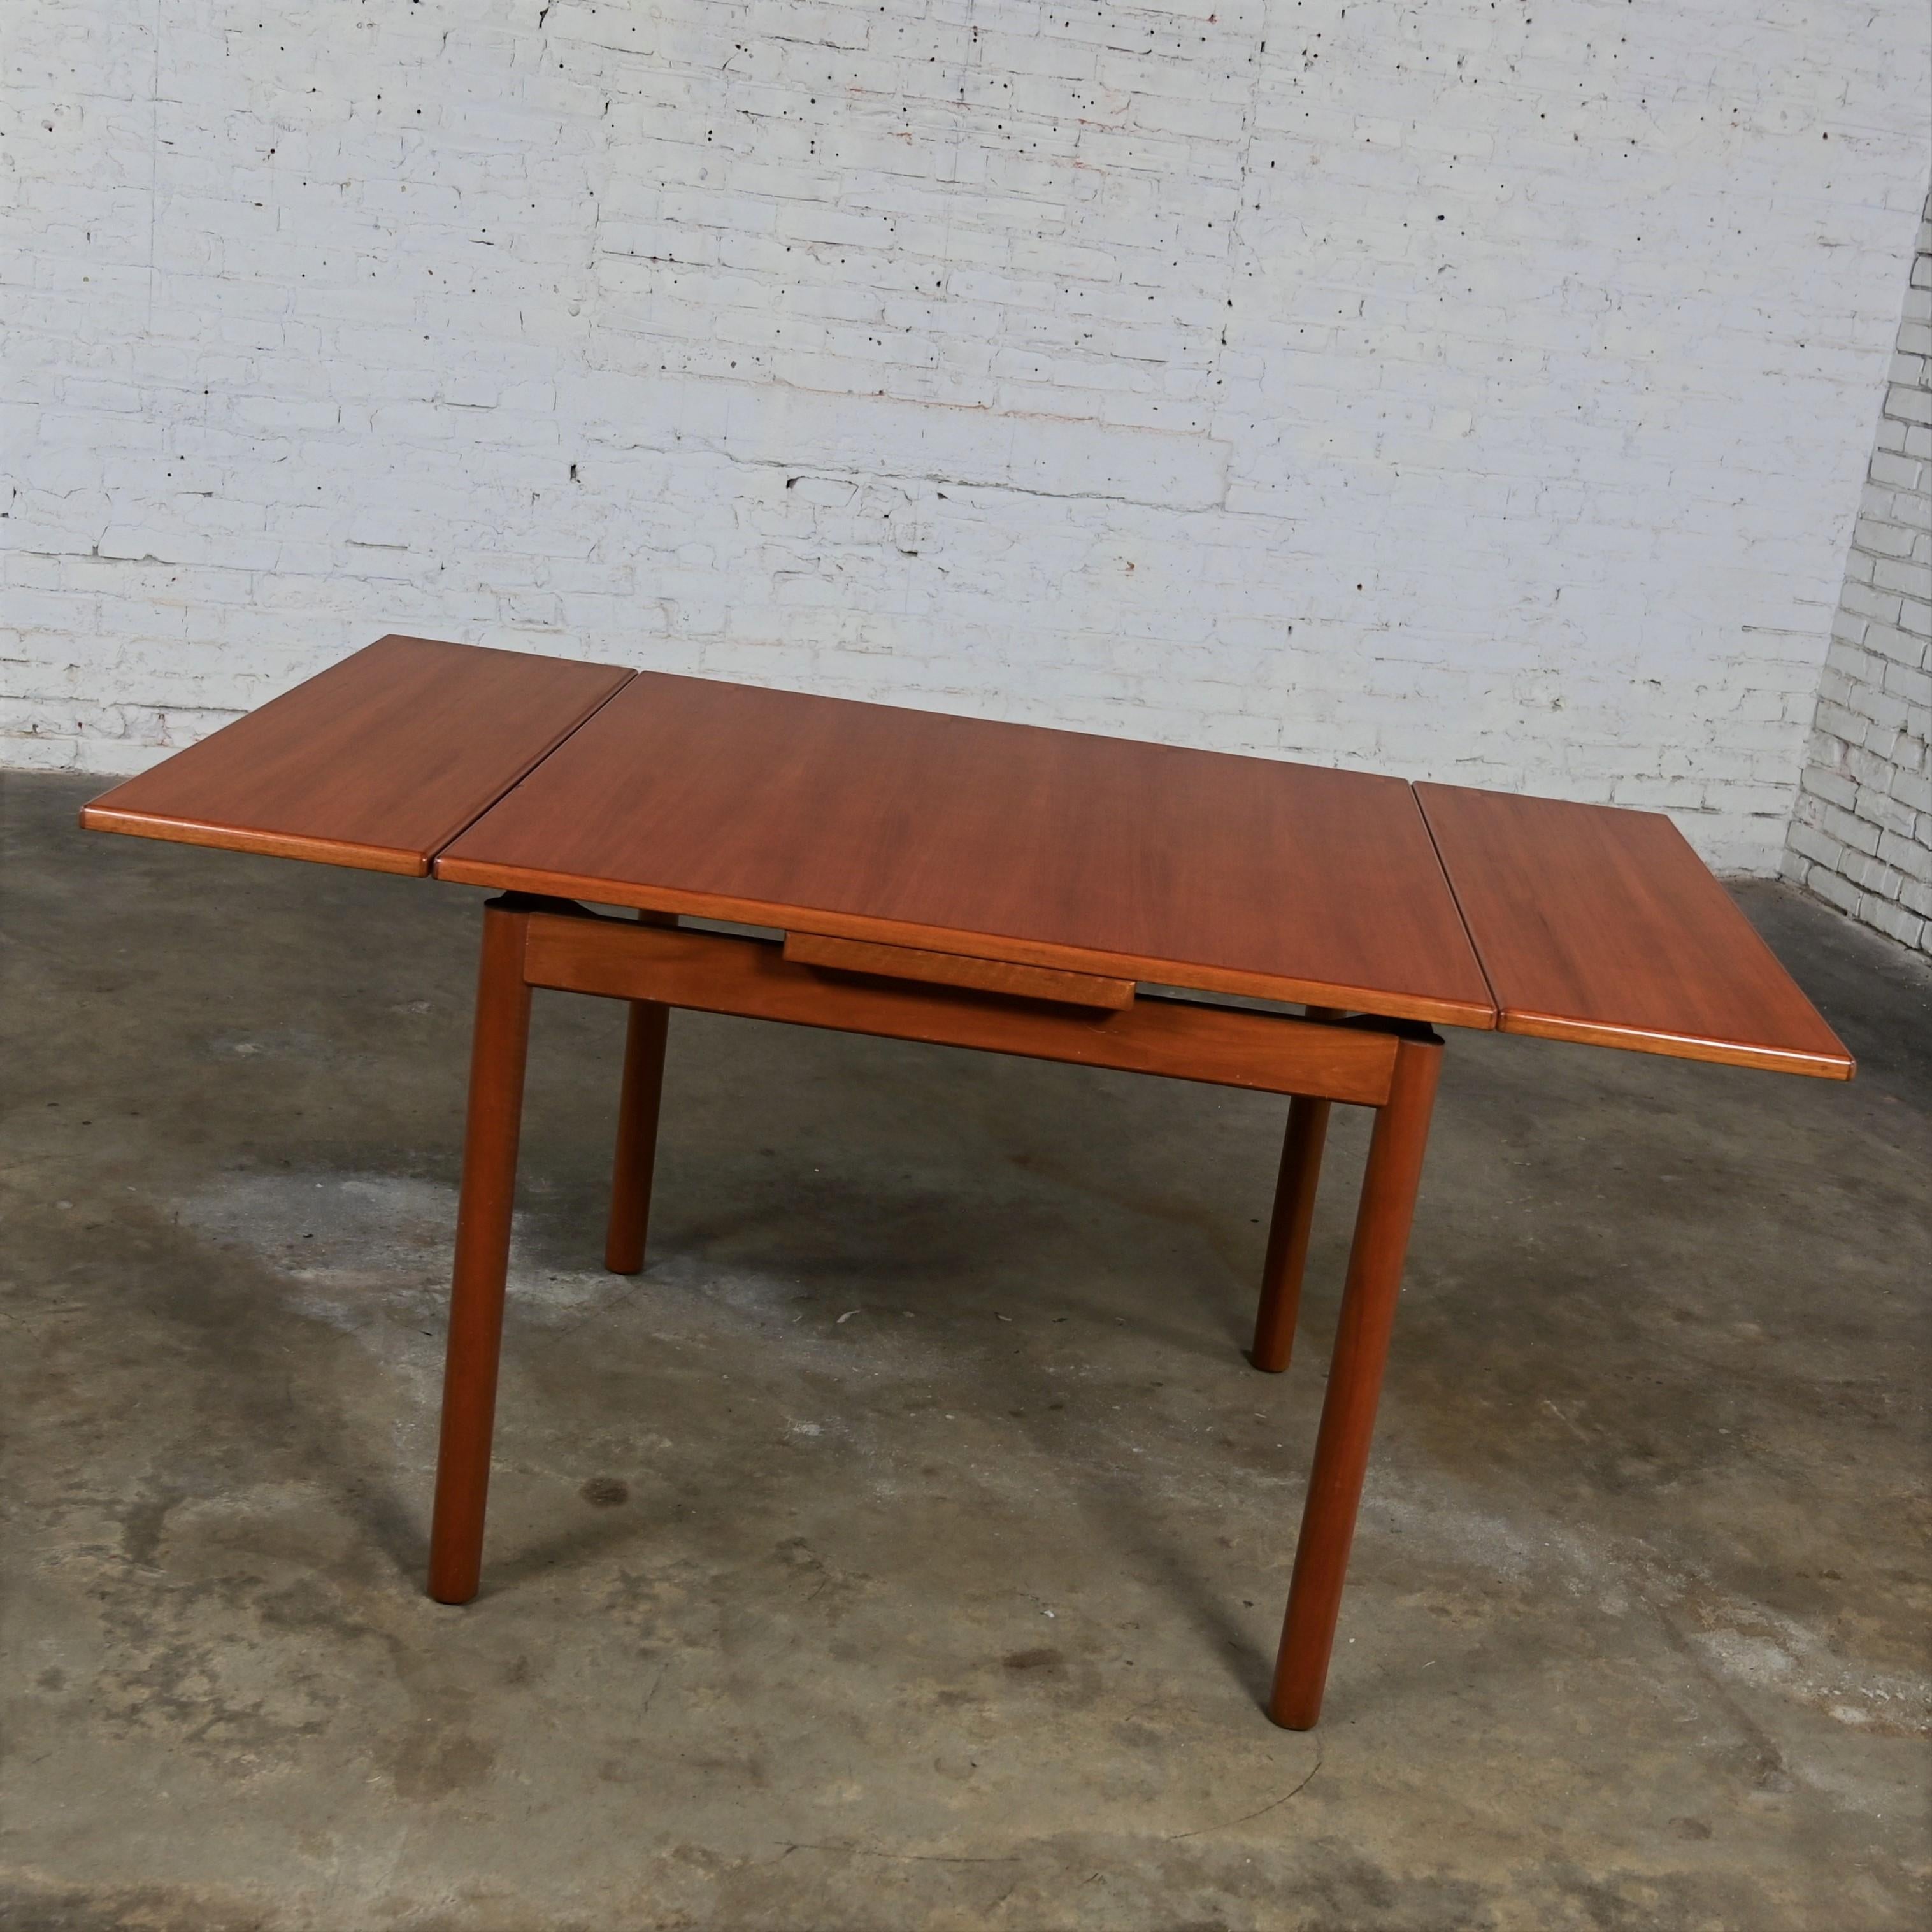 Scandinavian Modern Style Teak Square Extension Dining Table Made in Singapore For Sale 3